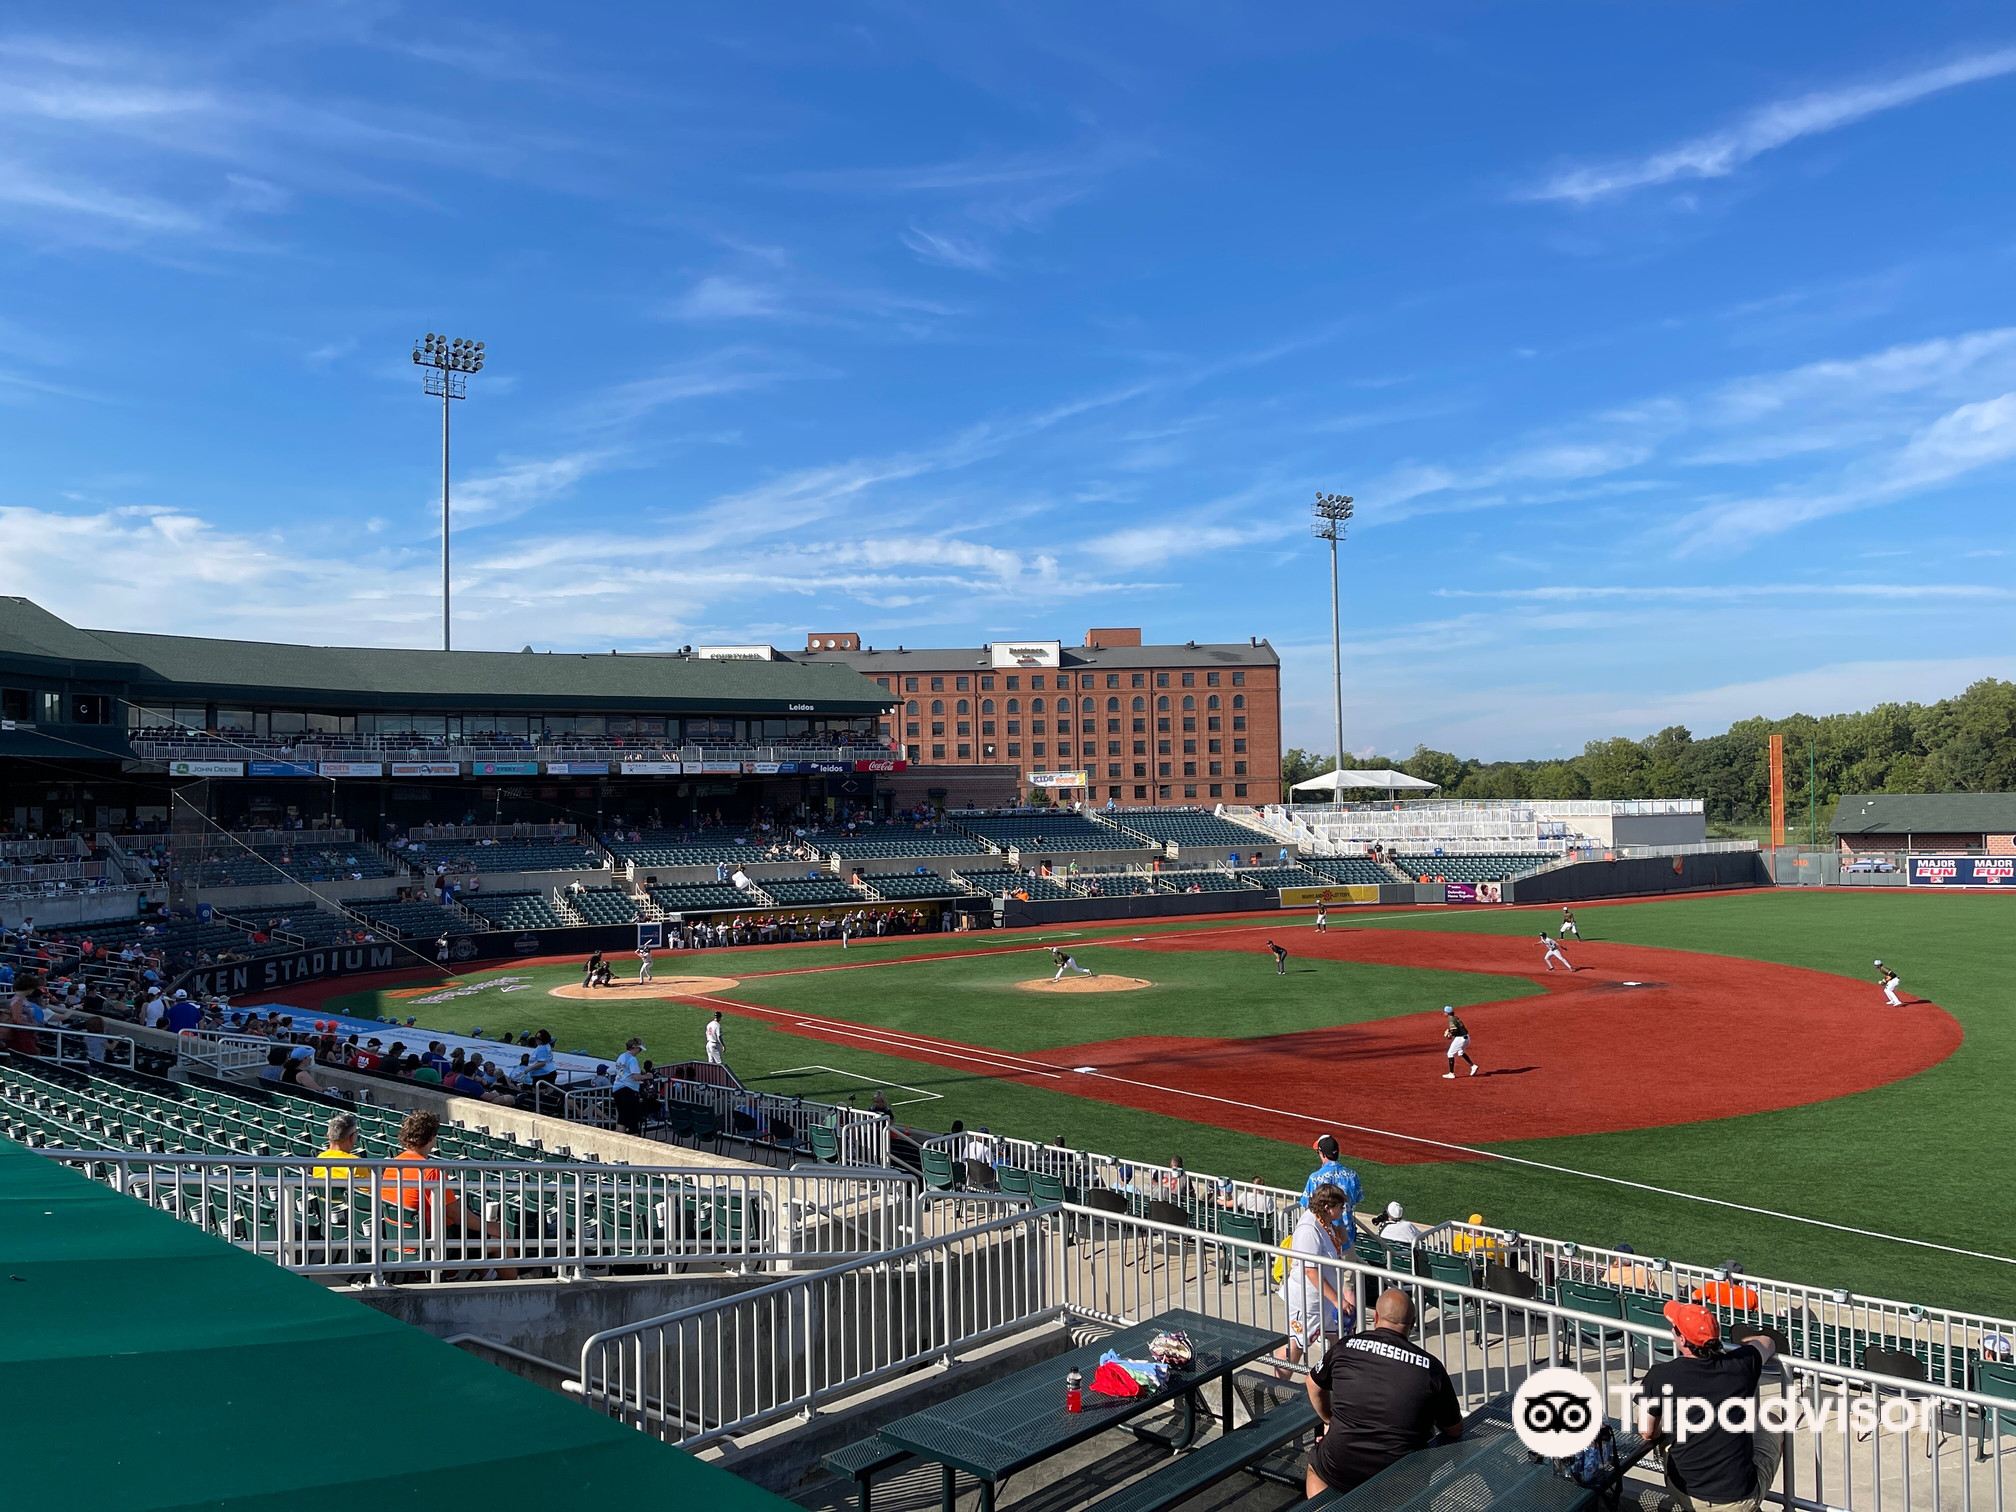 Latest travel itineraries for Leidos Field at Ripken Stadium in September (updated in 2023), Leidos Field at Ripken Stadium reviews, Leidos Field at Ripken Stadium address and opening hours, popular attractions, hotels,